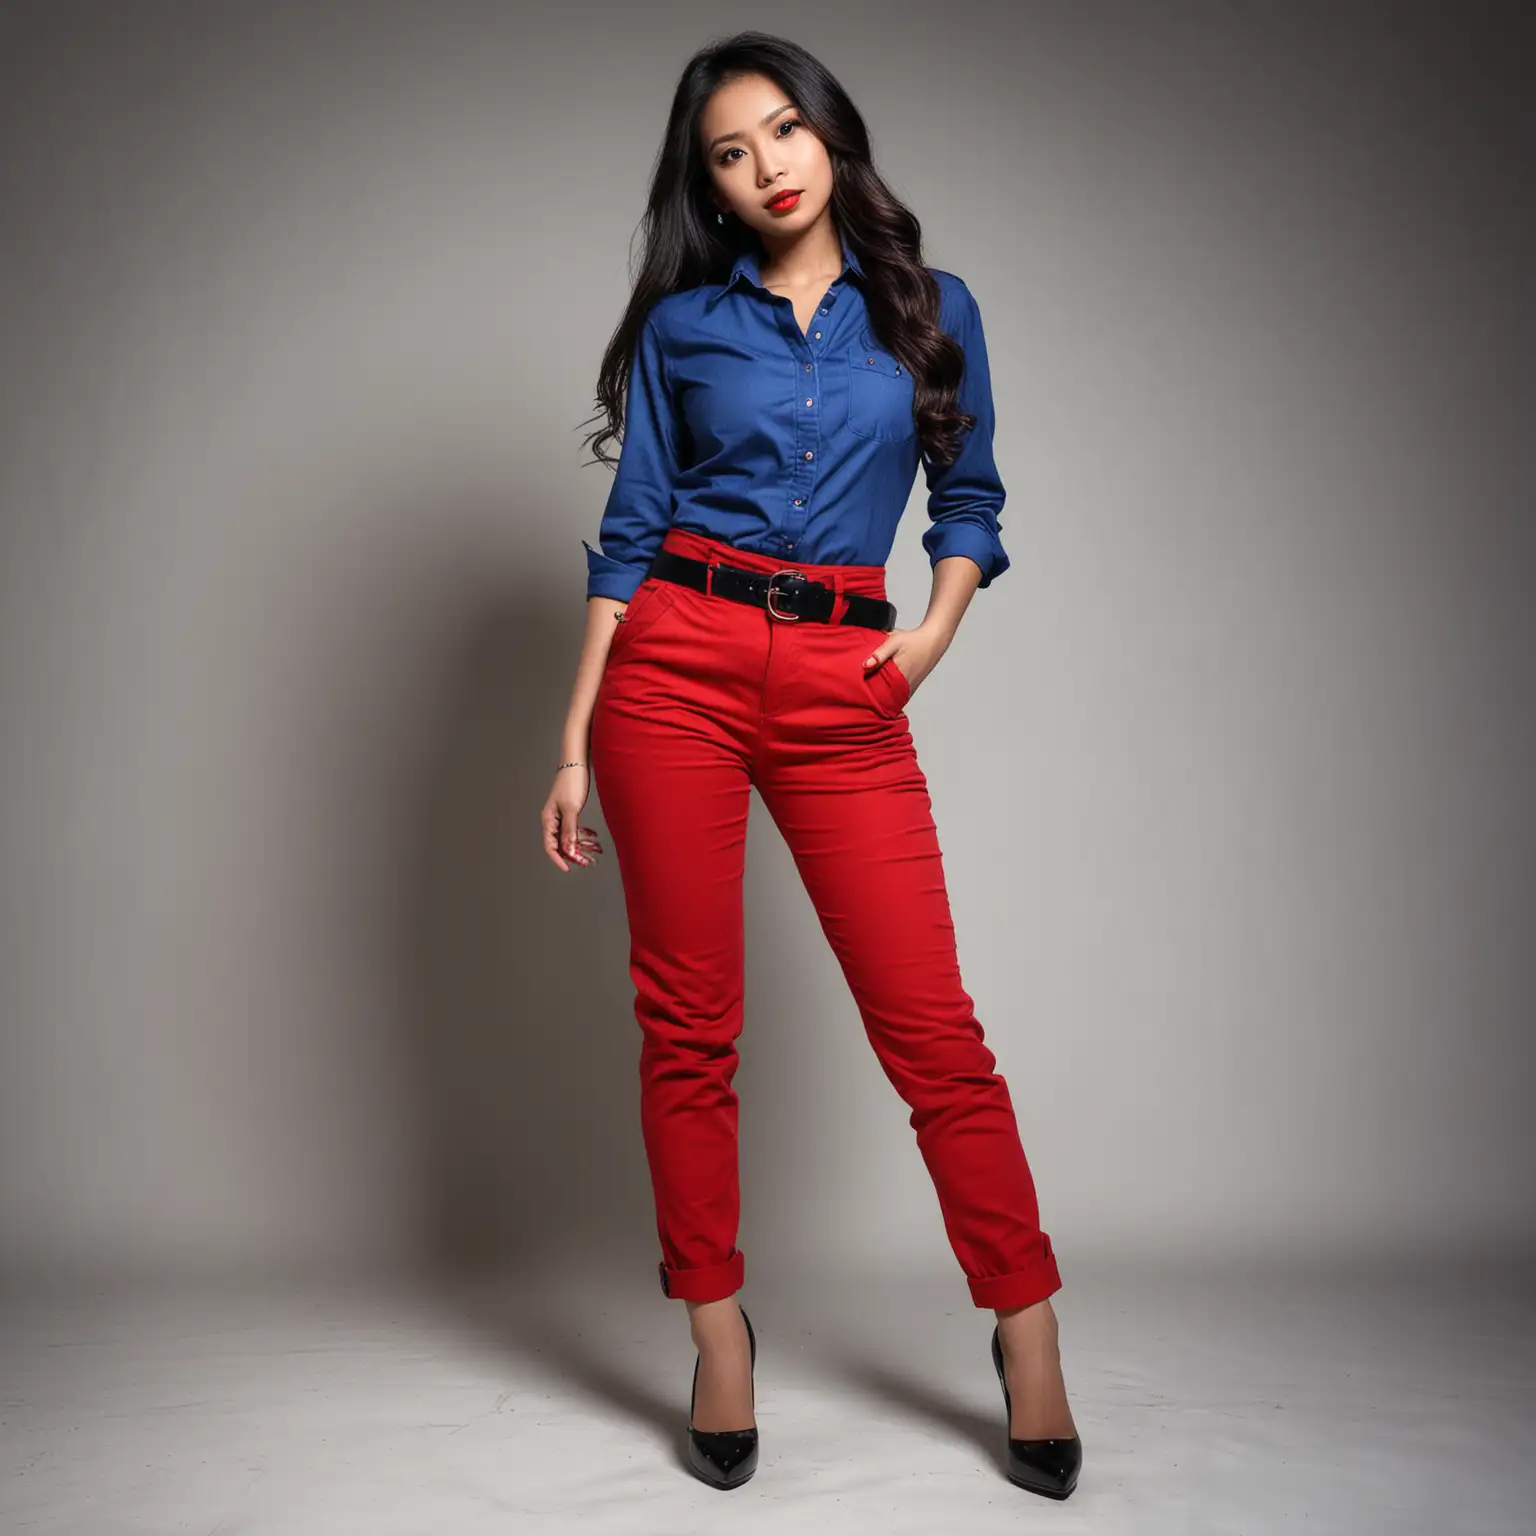 Malaysian female 25 years old, blue shirt, red pants, red lipsticks, black long hair, red color belt, black color heels, full body, blank background, dramatic lighting.